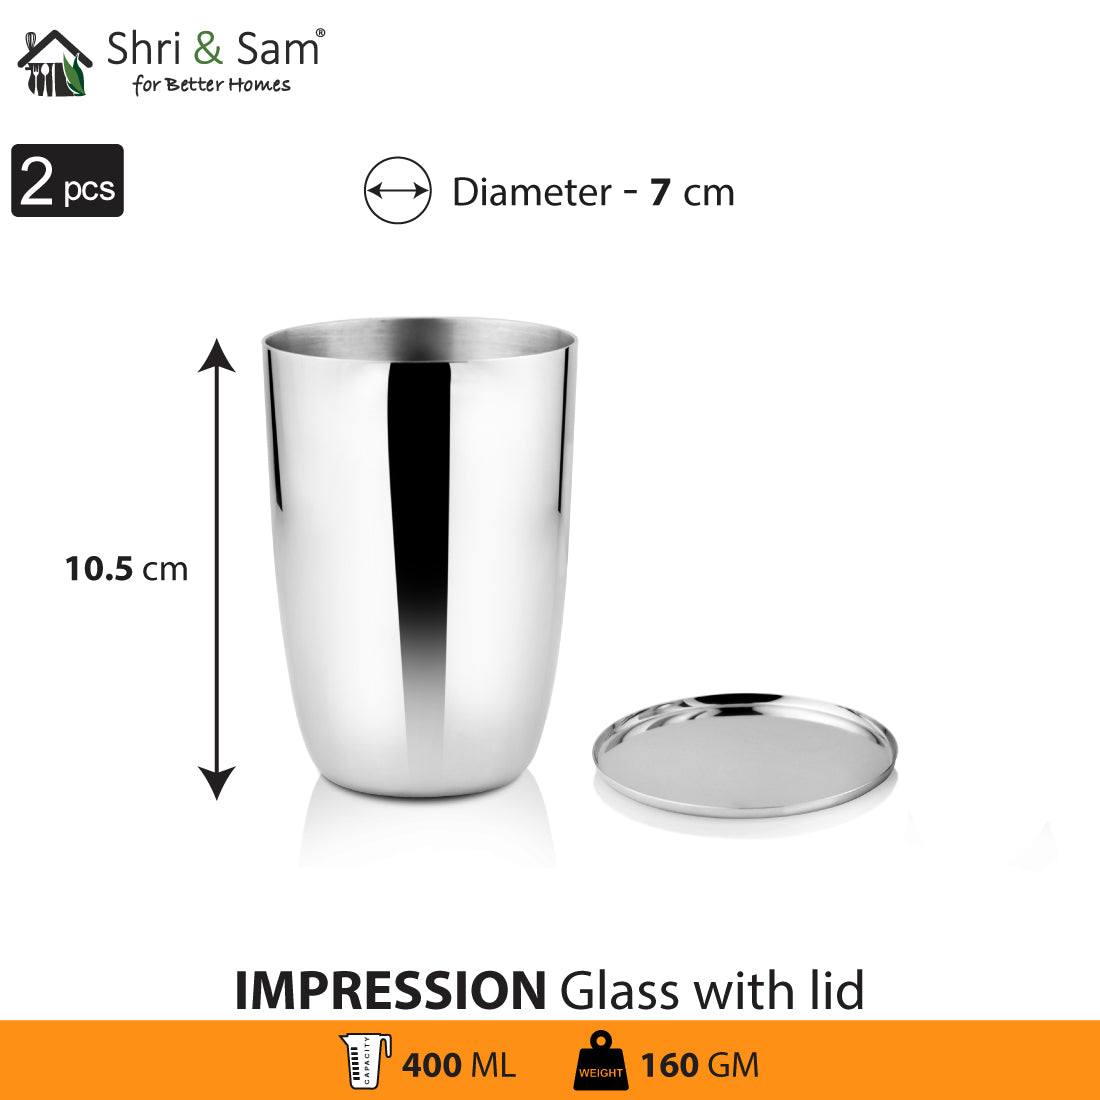 Stainless Steel 2 PCS Glass with SS Lid Impression